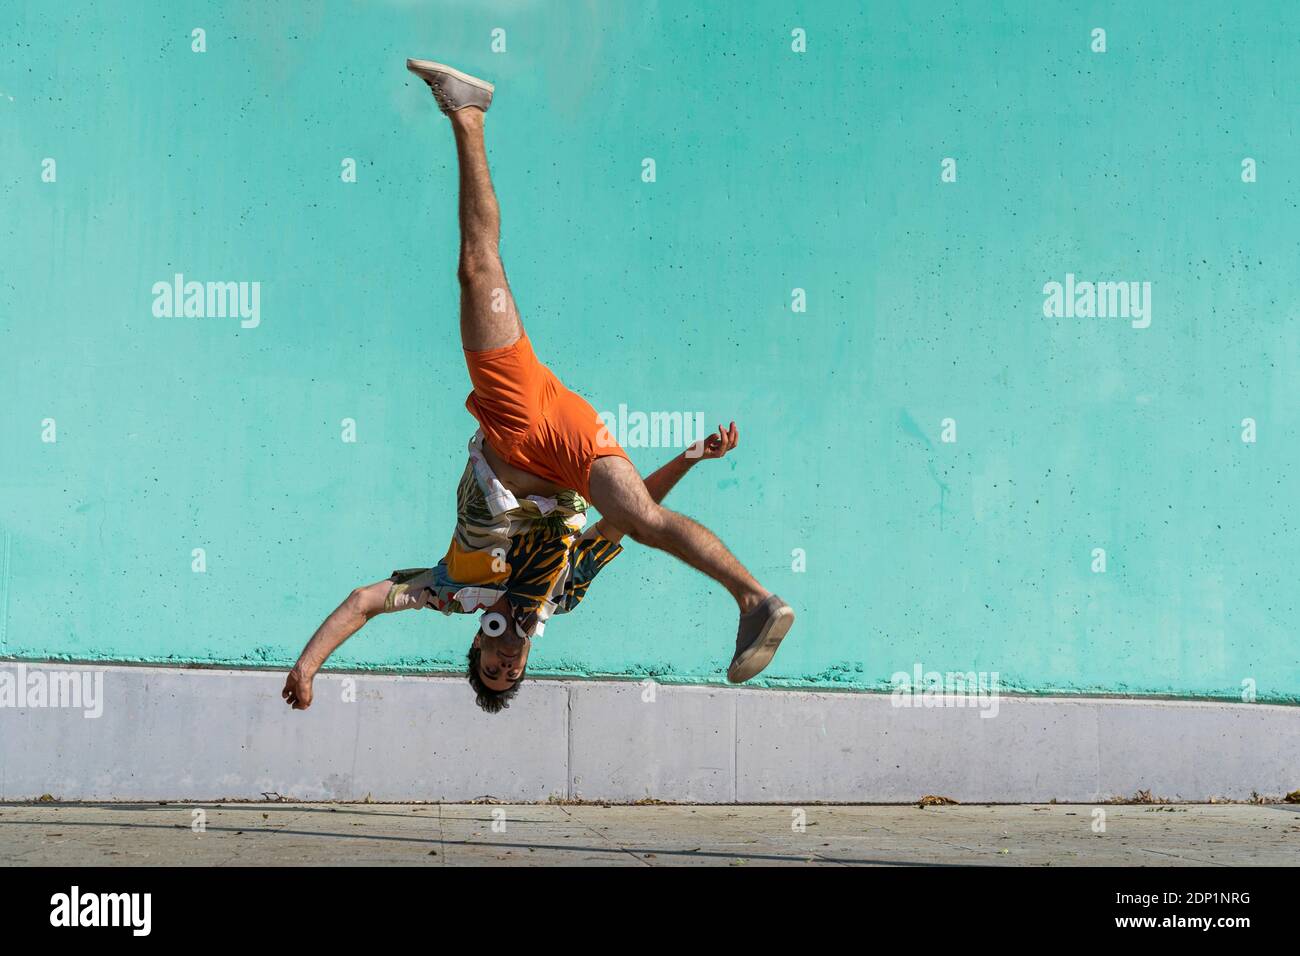 Casual man somersaulting in front of green wall Stock Photo